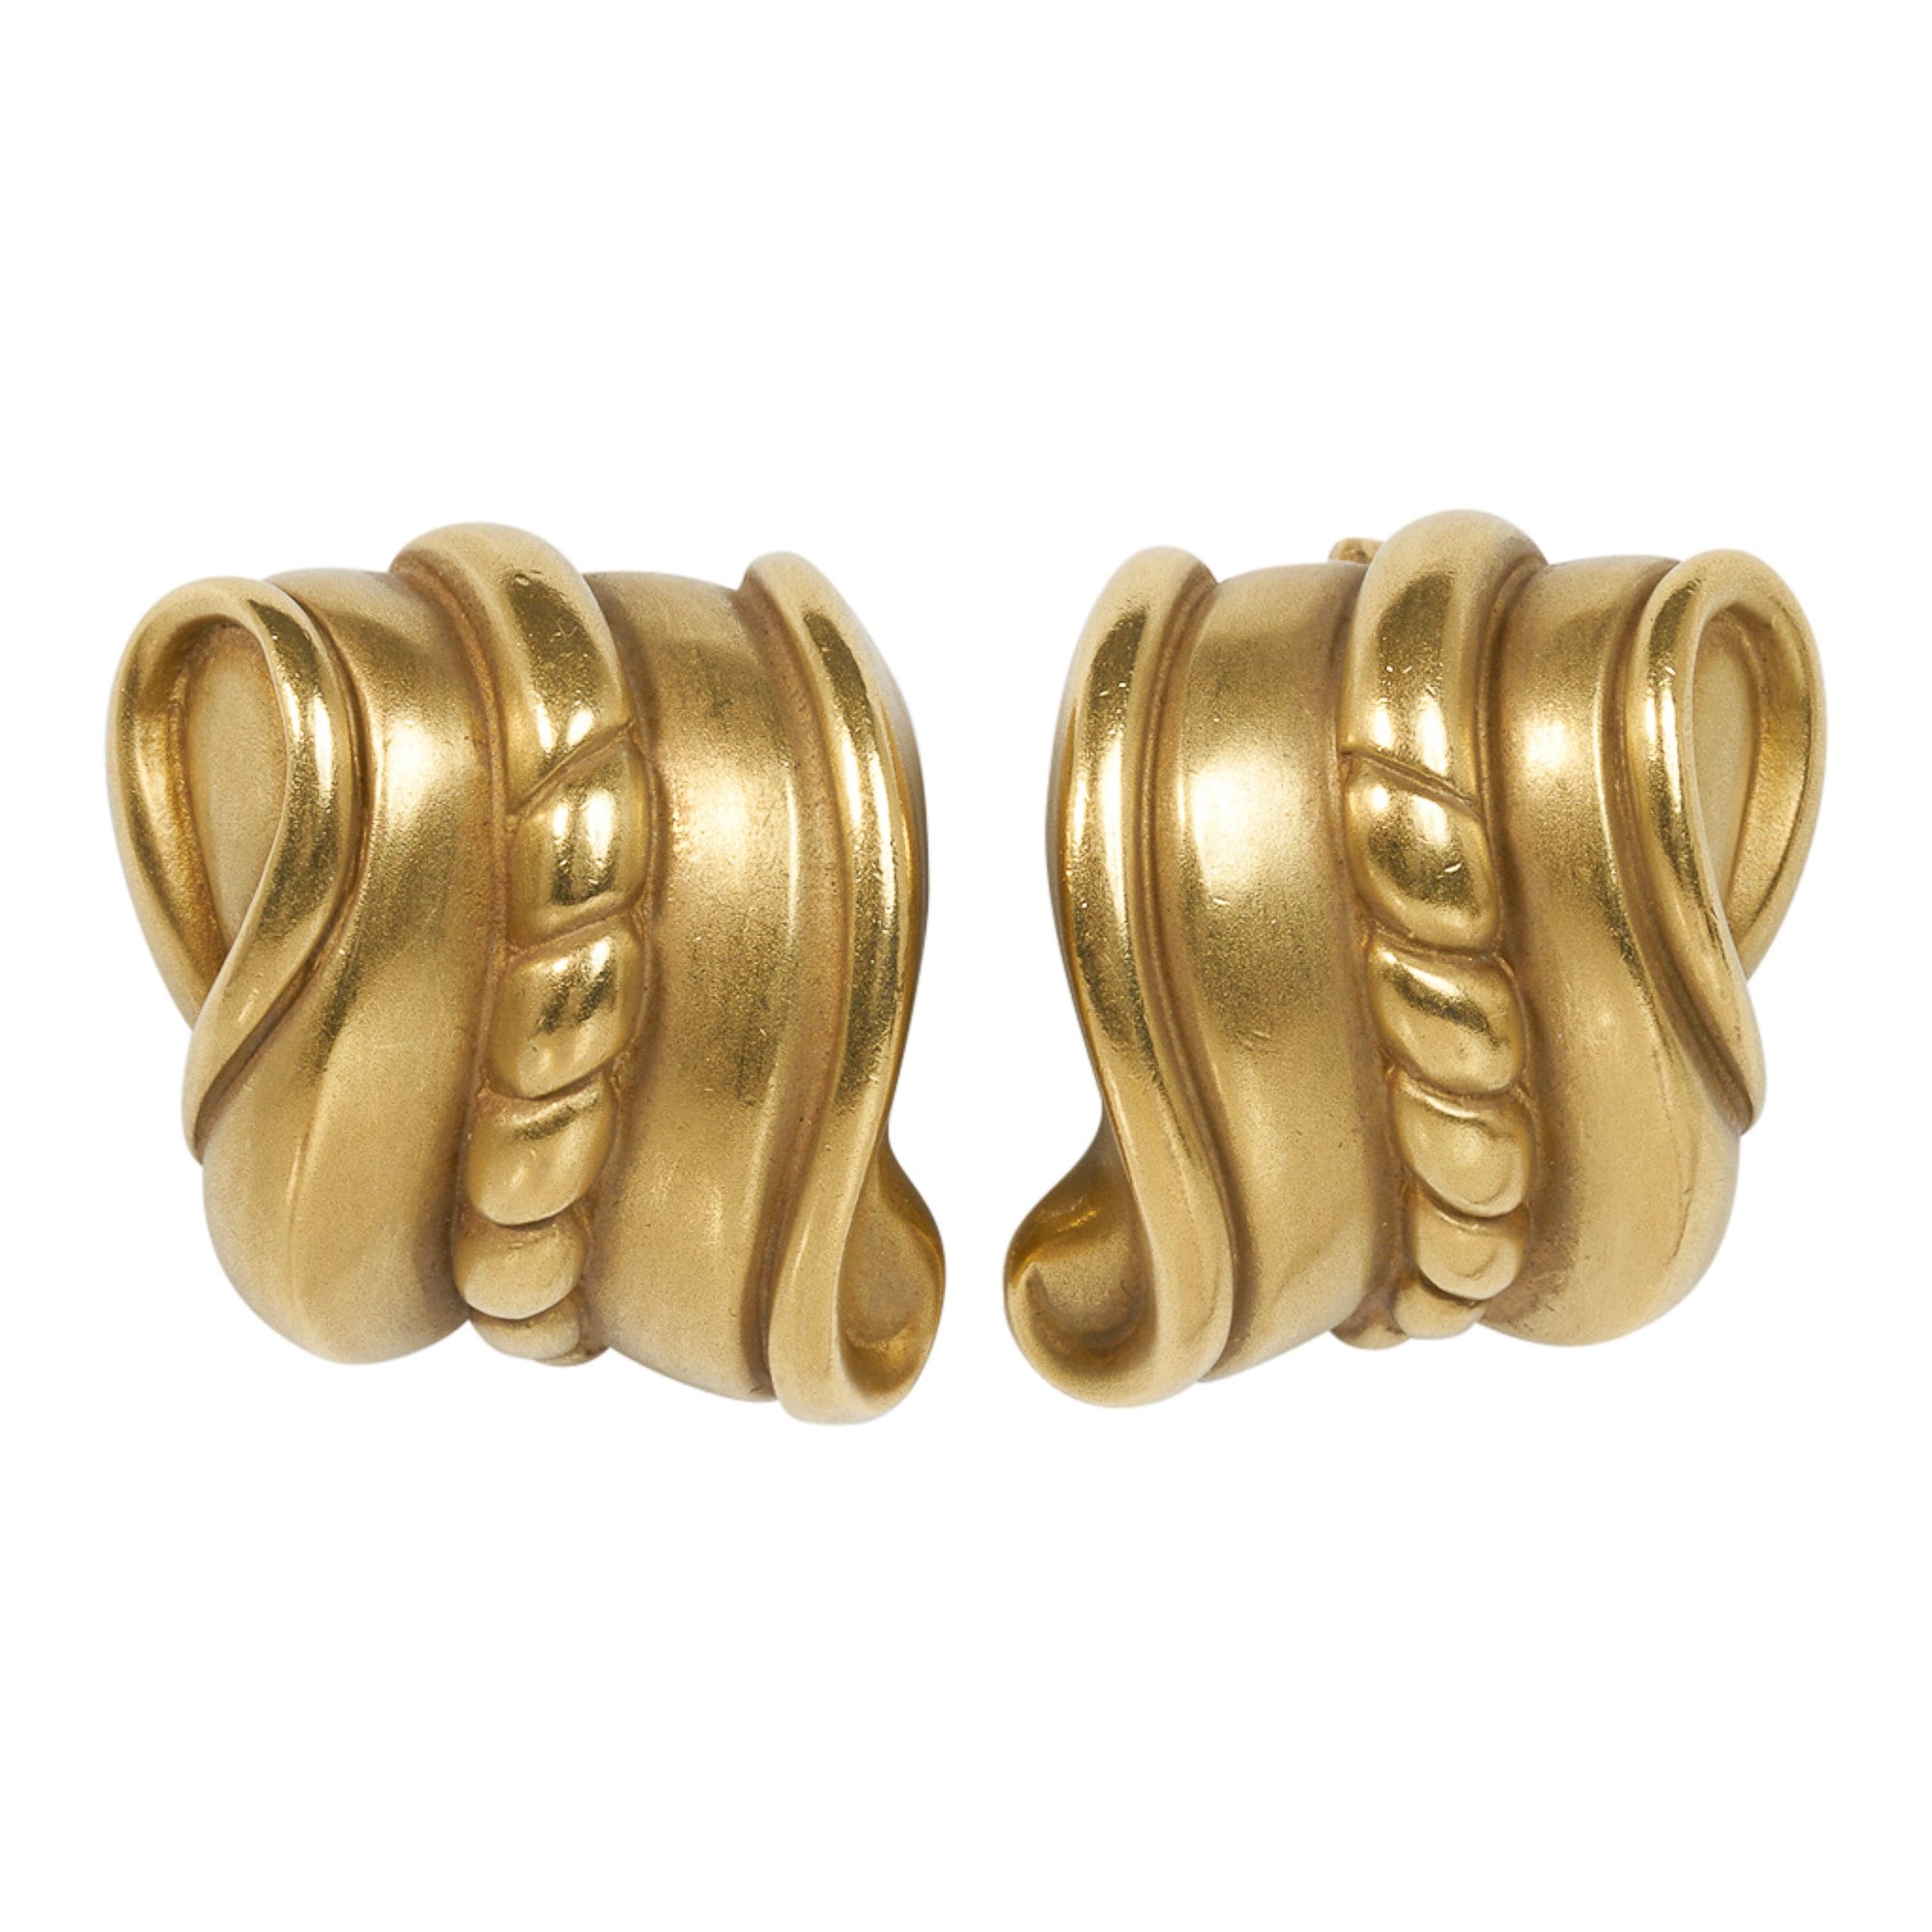 Barry Kieselstein-Cord  Omega Collection 18K Gold Earrings